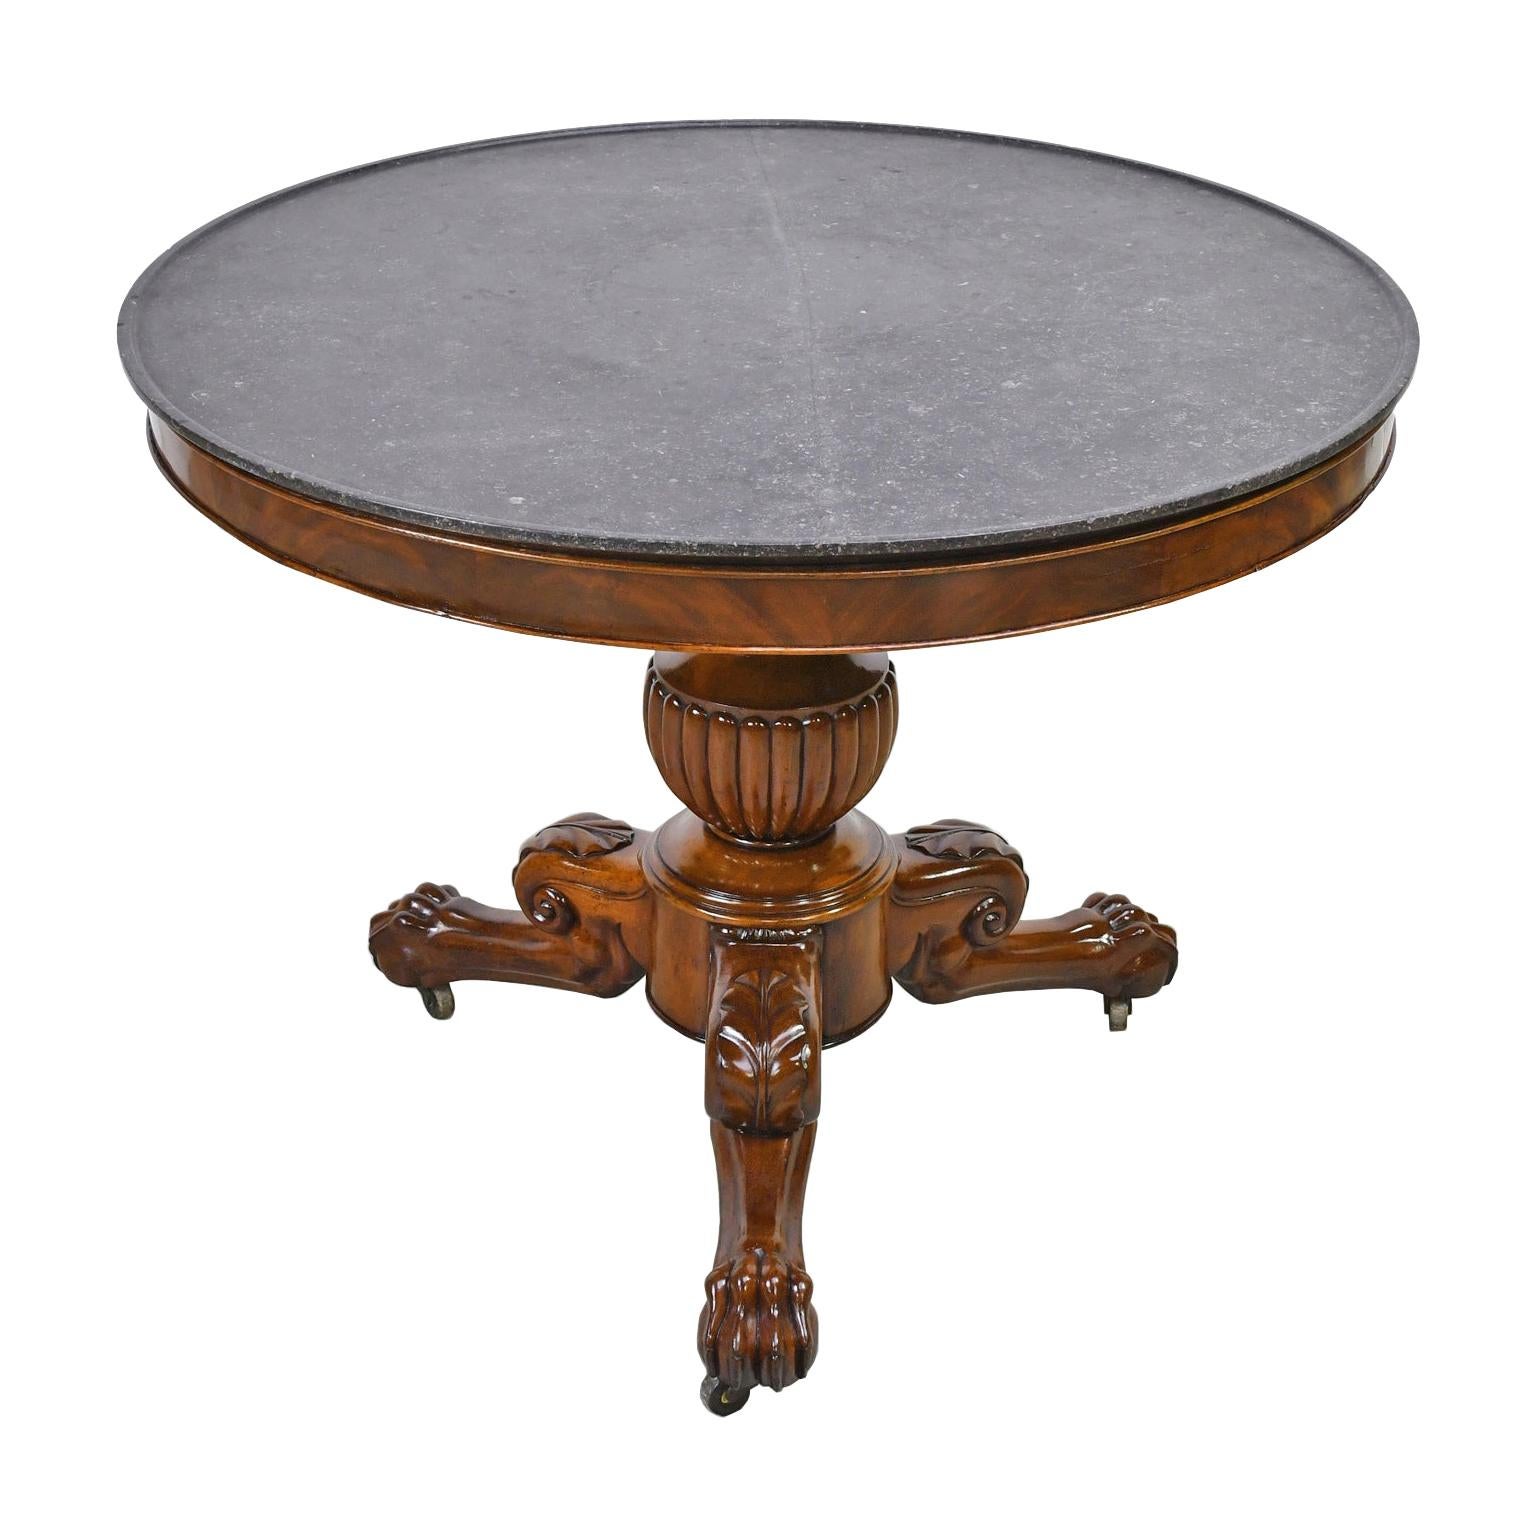 Somewhat larger than usual, this French Charles X guéridon in fine West Indies mahogany has the original round black marble top with a champhered edge that rests on an apron showcasing the figuring of this beautiful wood. The pedestal is composed of